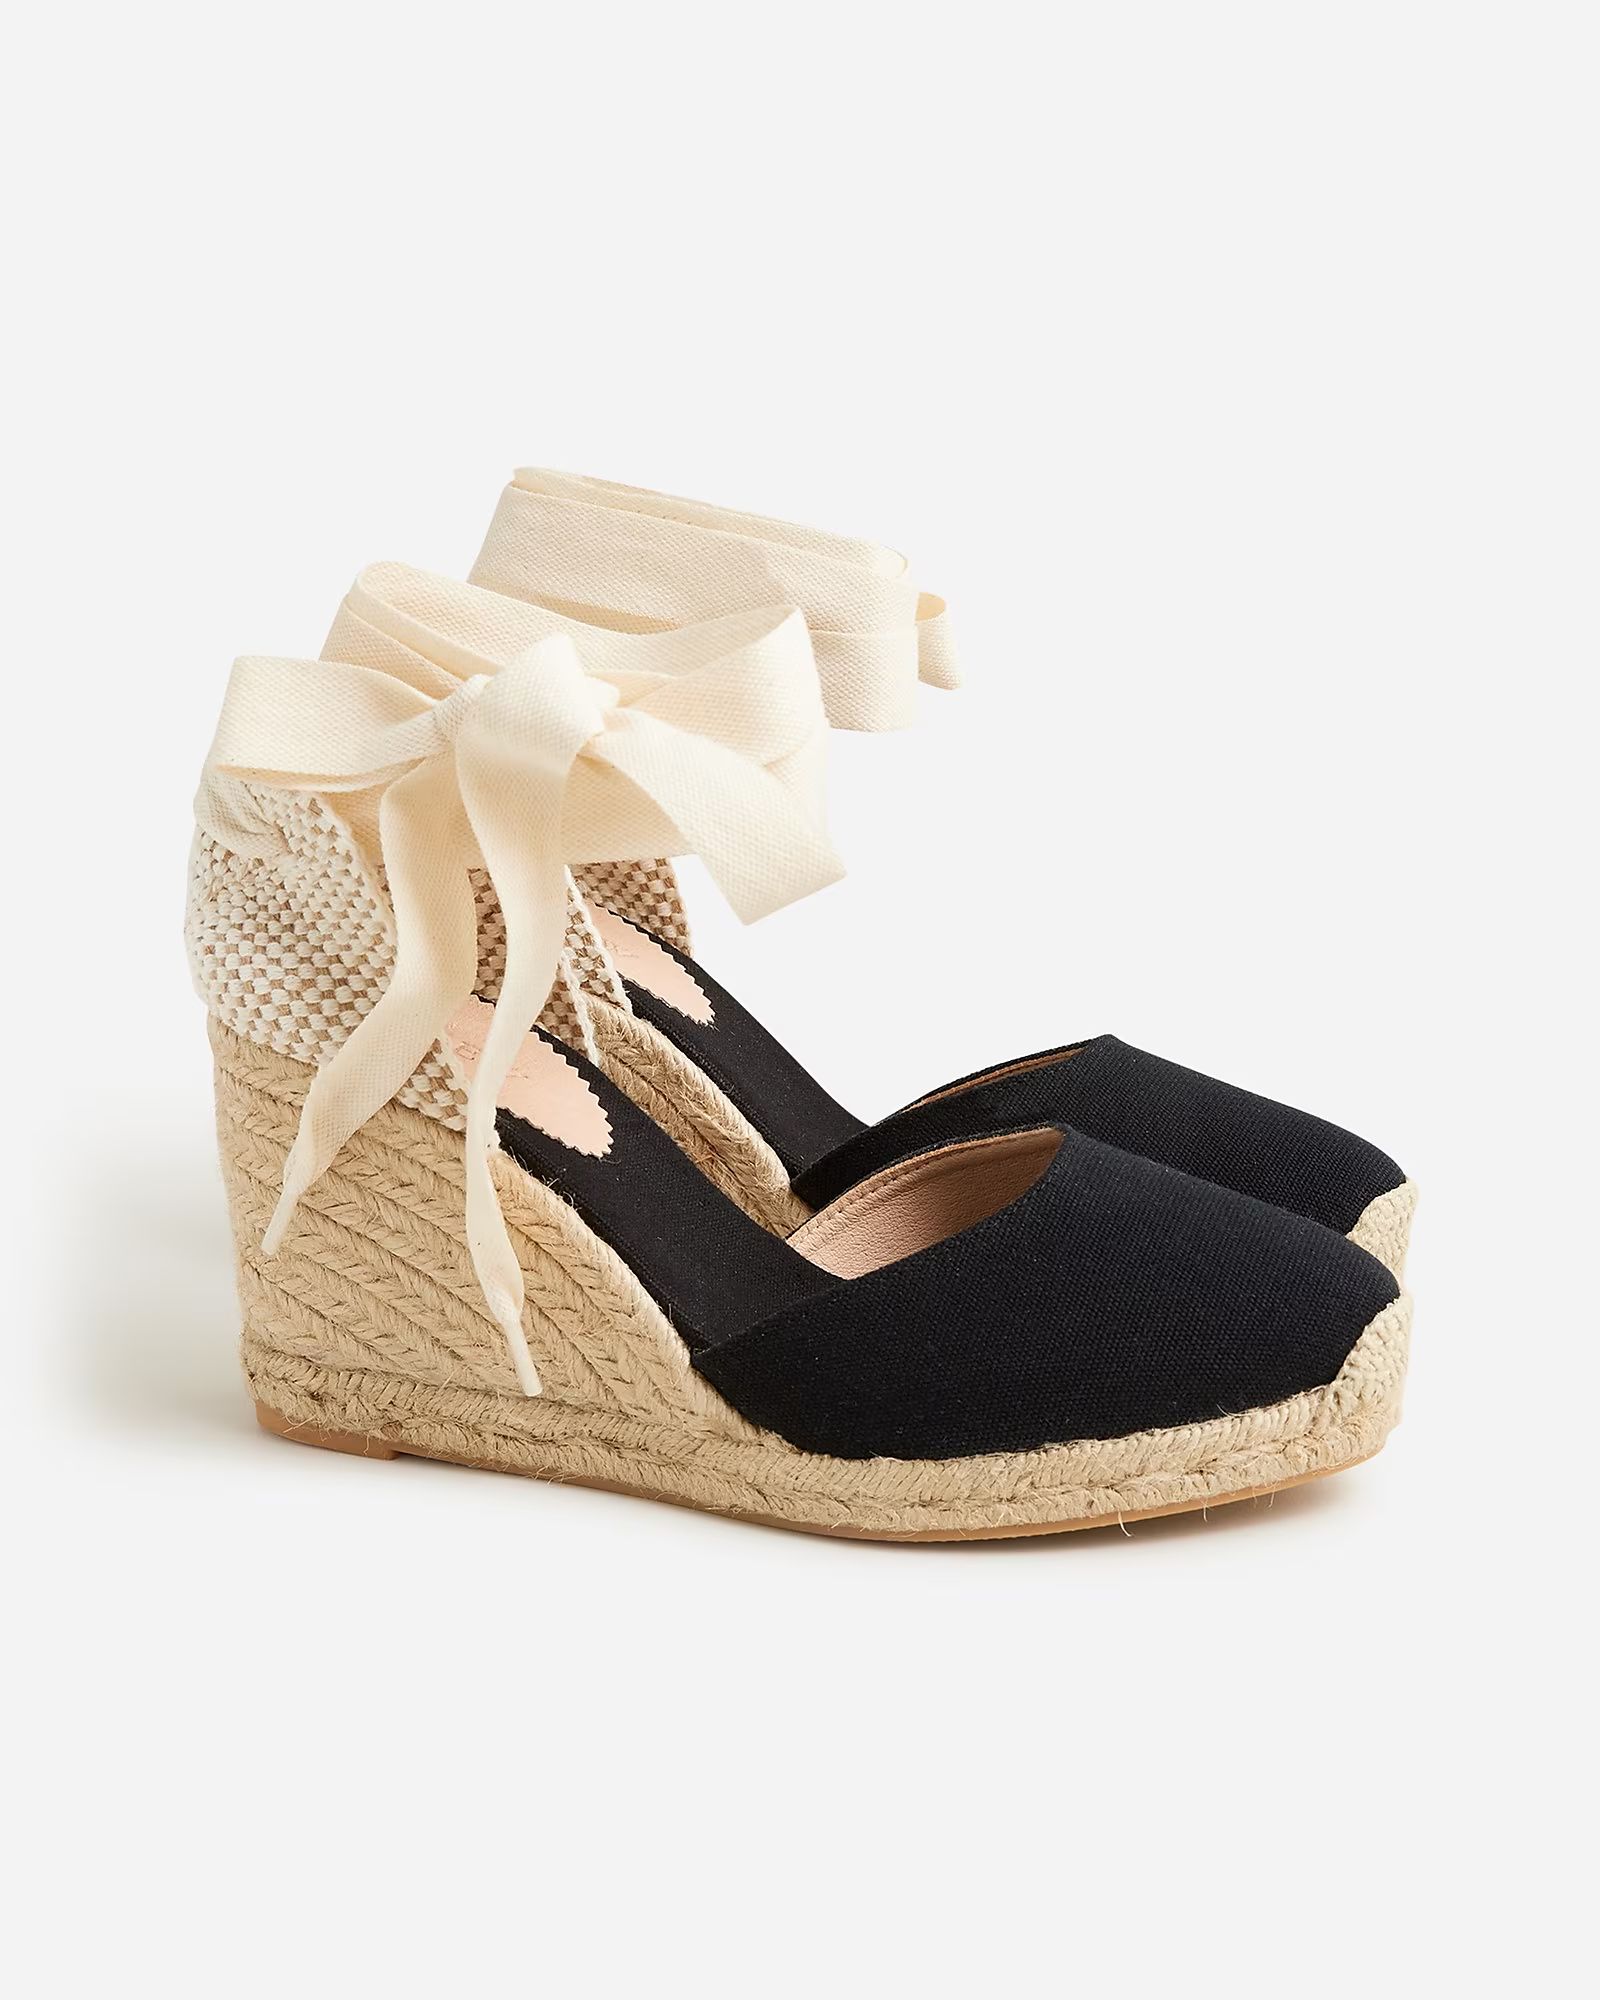 Made-in-Spain lace-up high-heel espadrilles | J.Crew US